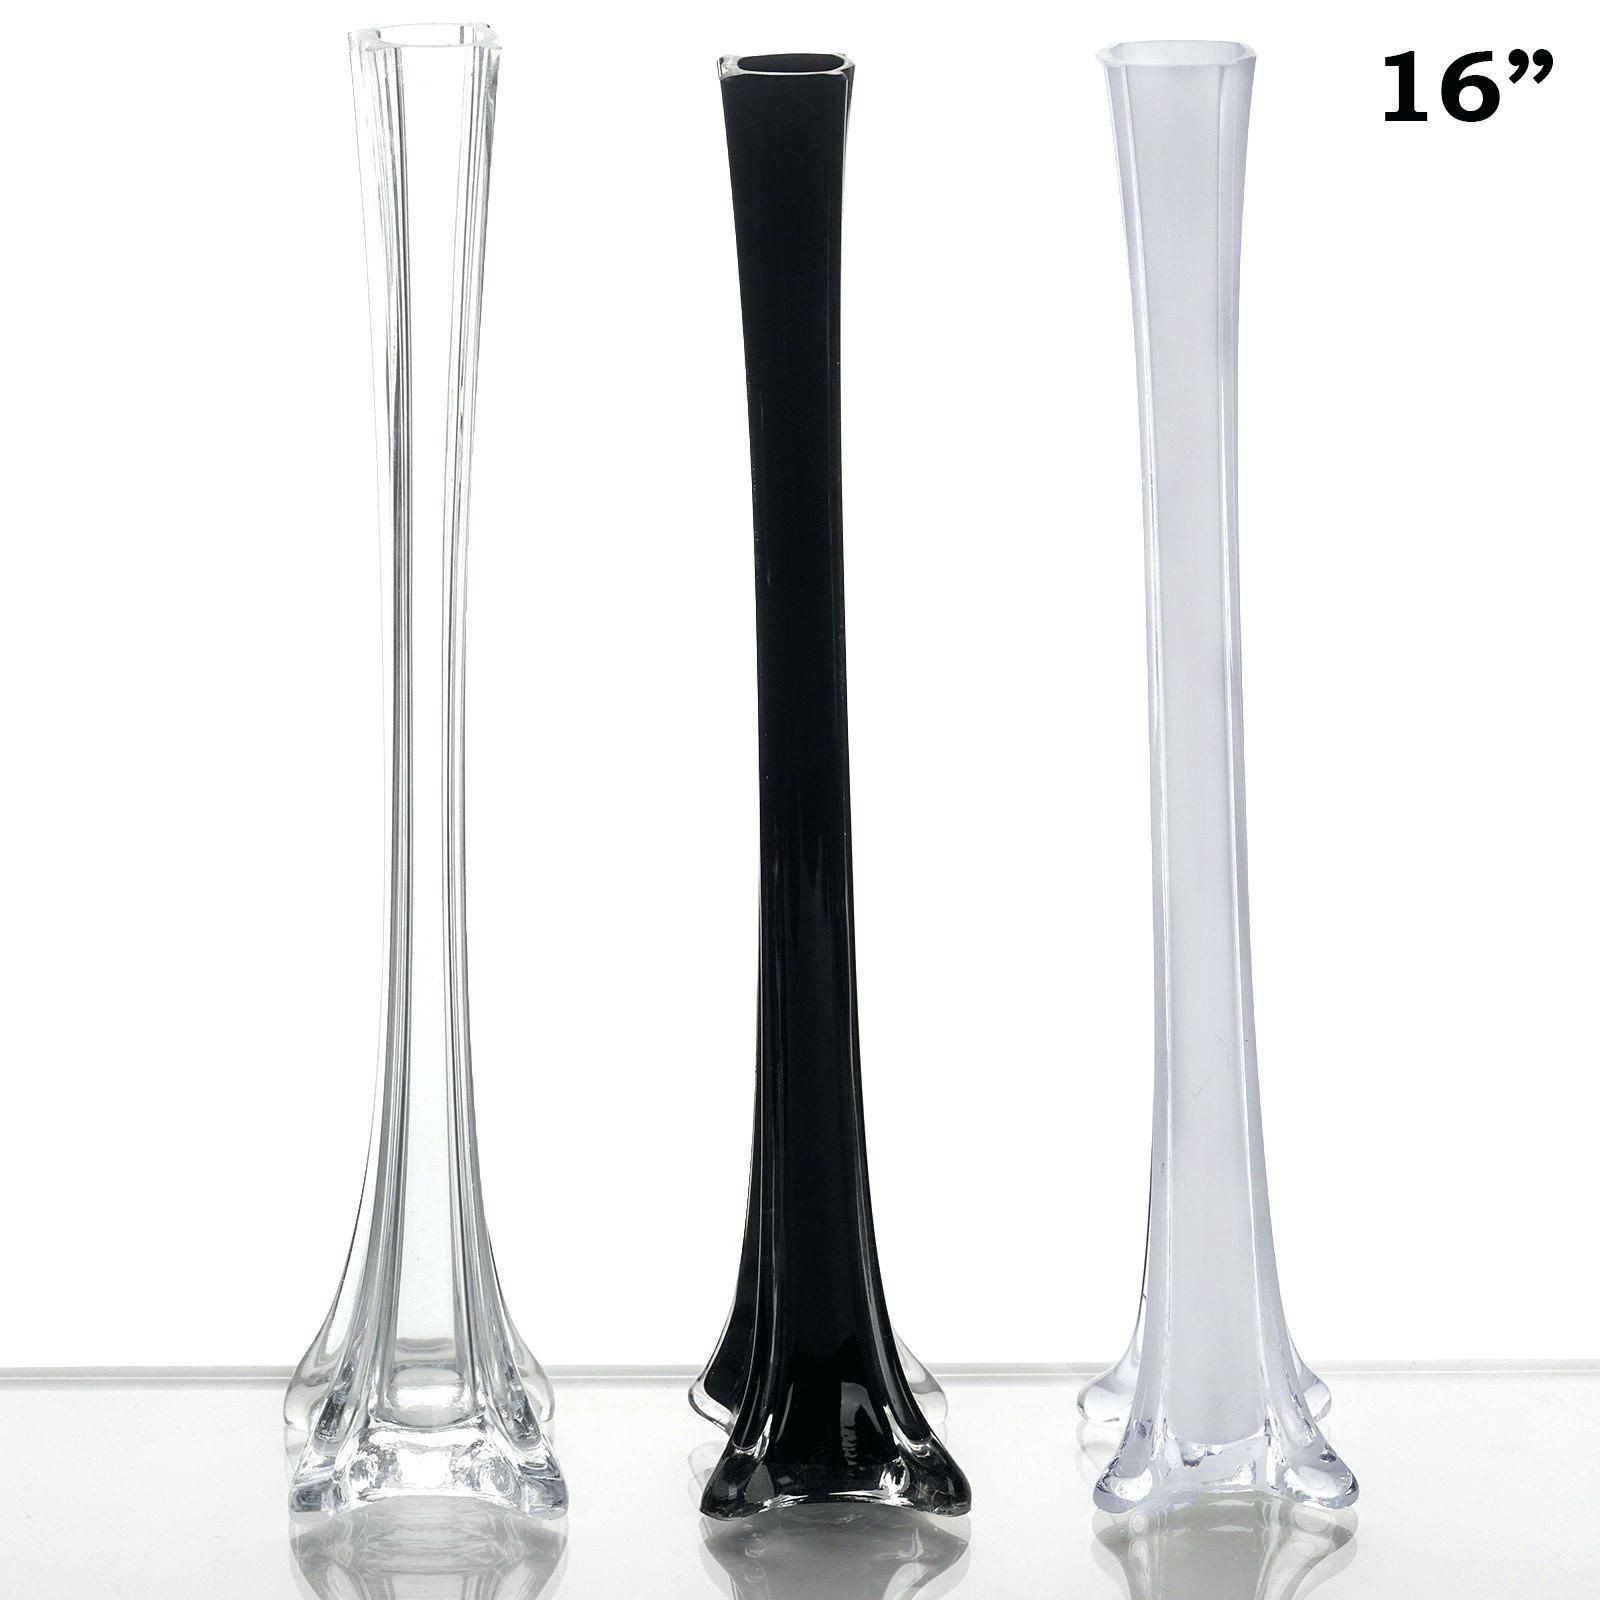 15 Unique Cheap Plastic Vases wholesale 2024 free download cheap plastic vases wholesale of 40 glass vases bulk the weekly world in gallery plastic eiffel tower vases wholesale drawings art gallery